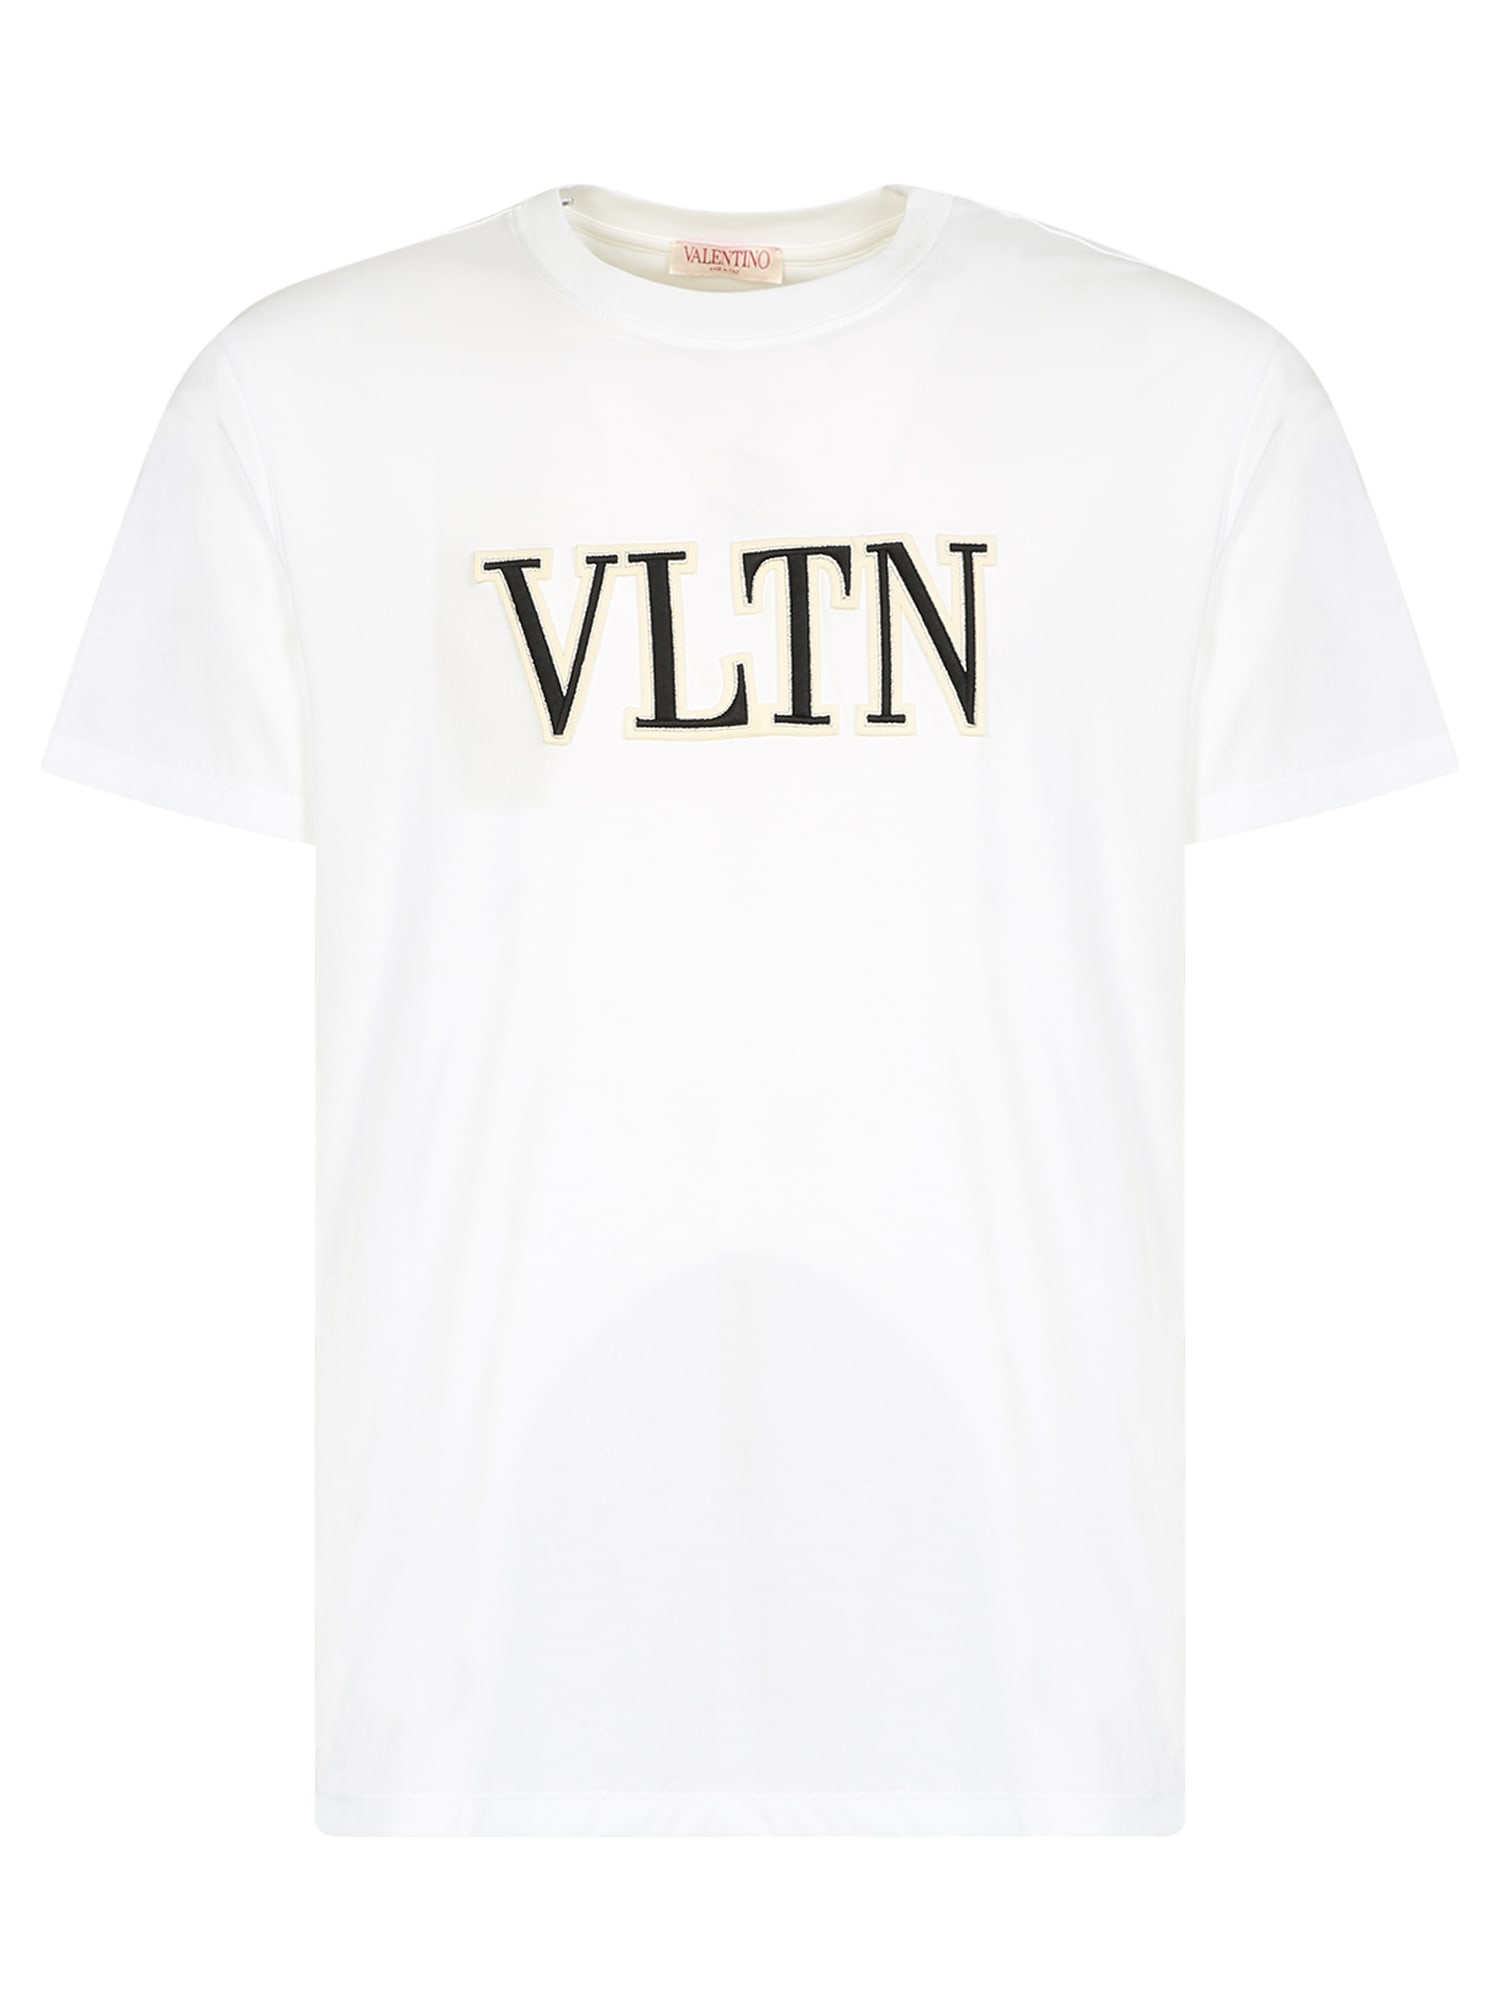 Valentino Cotton T-shirt With Signature Embroidered Vltn